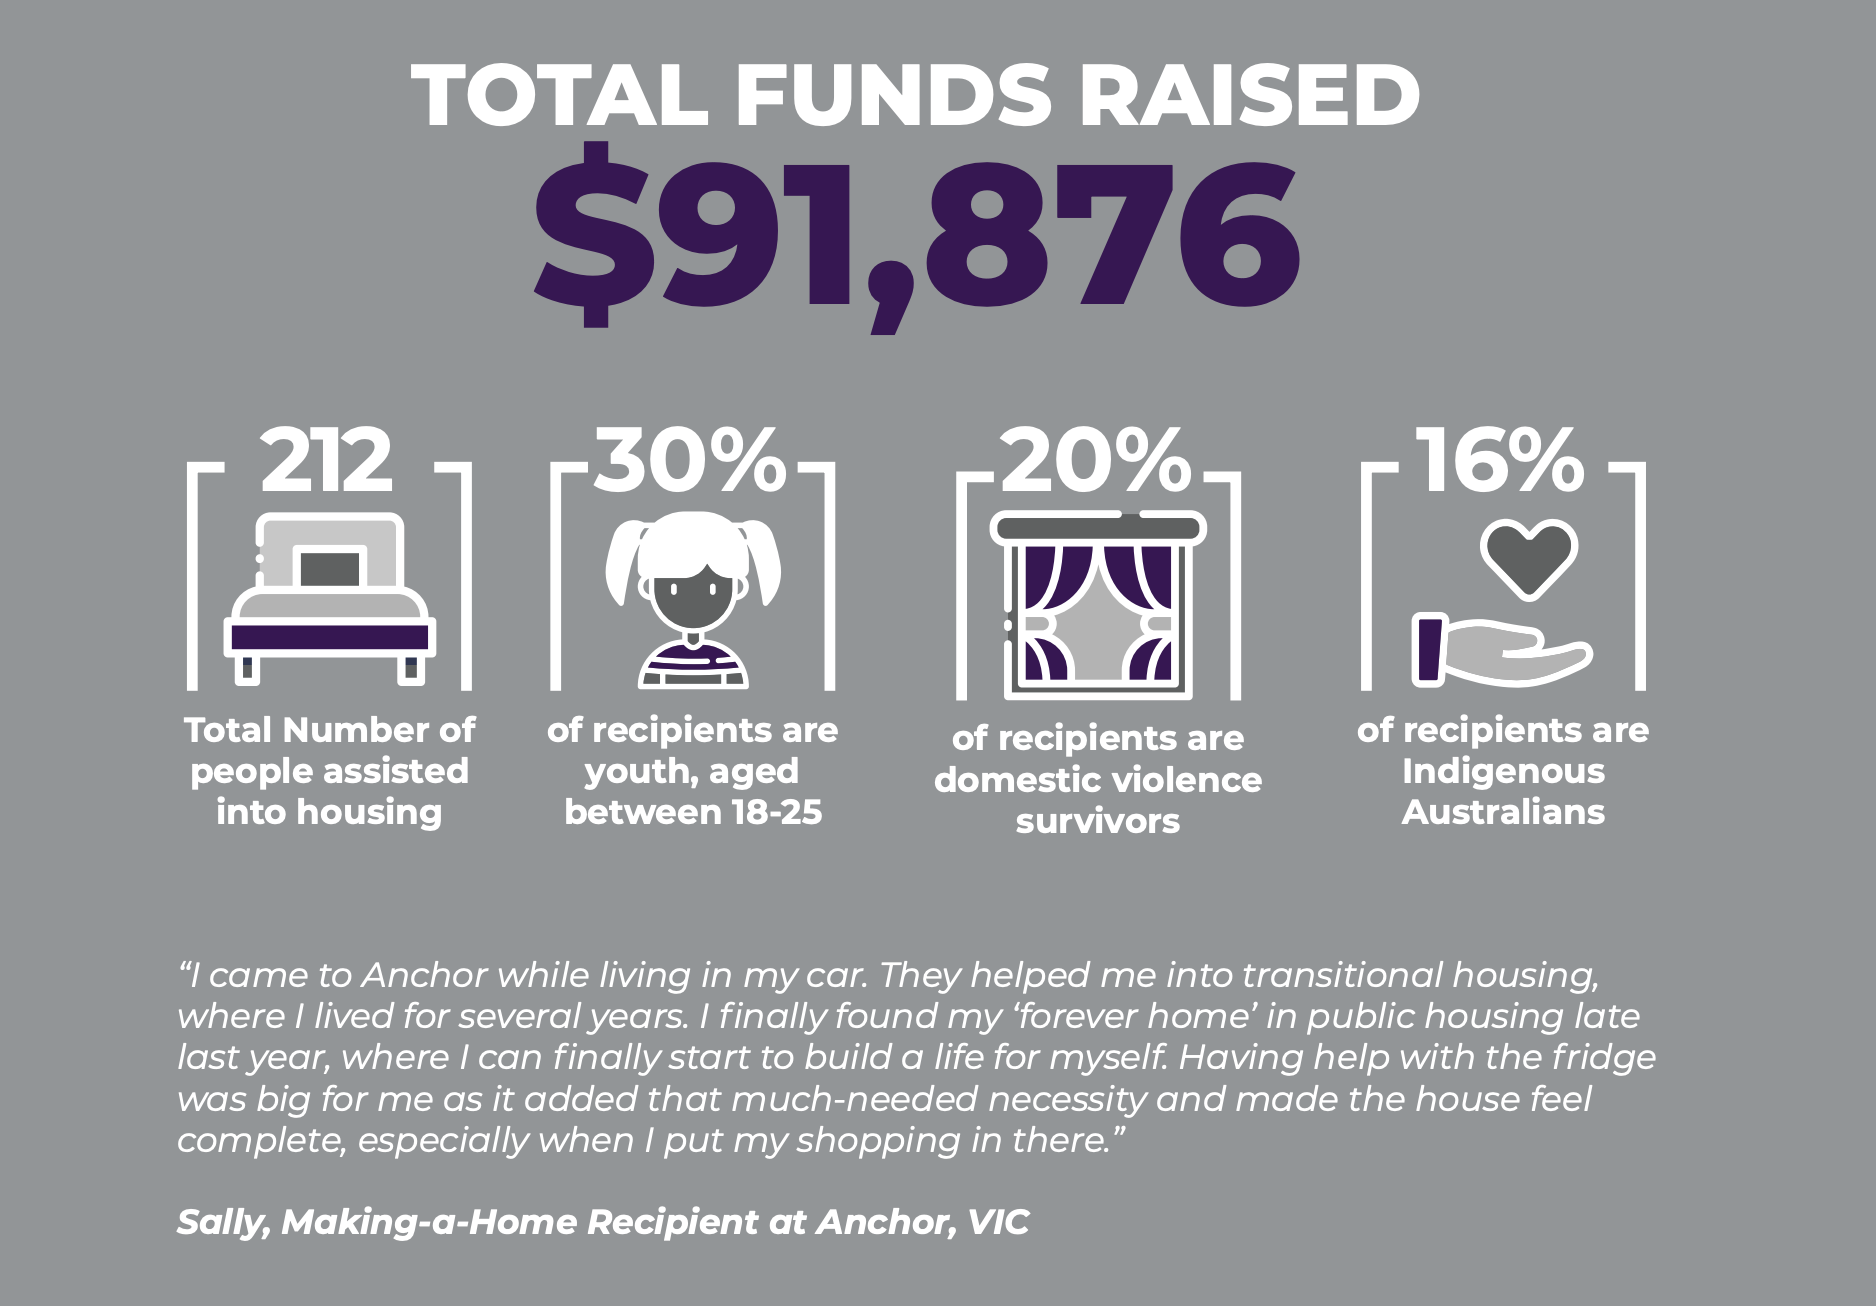 statistics from the funds raised as part of Streetsmart's Making-a-Home program